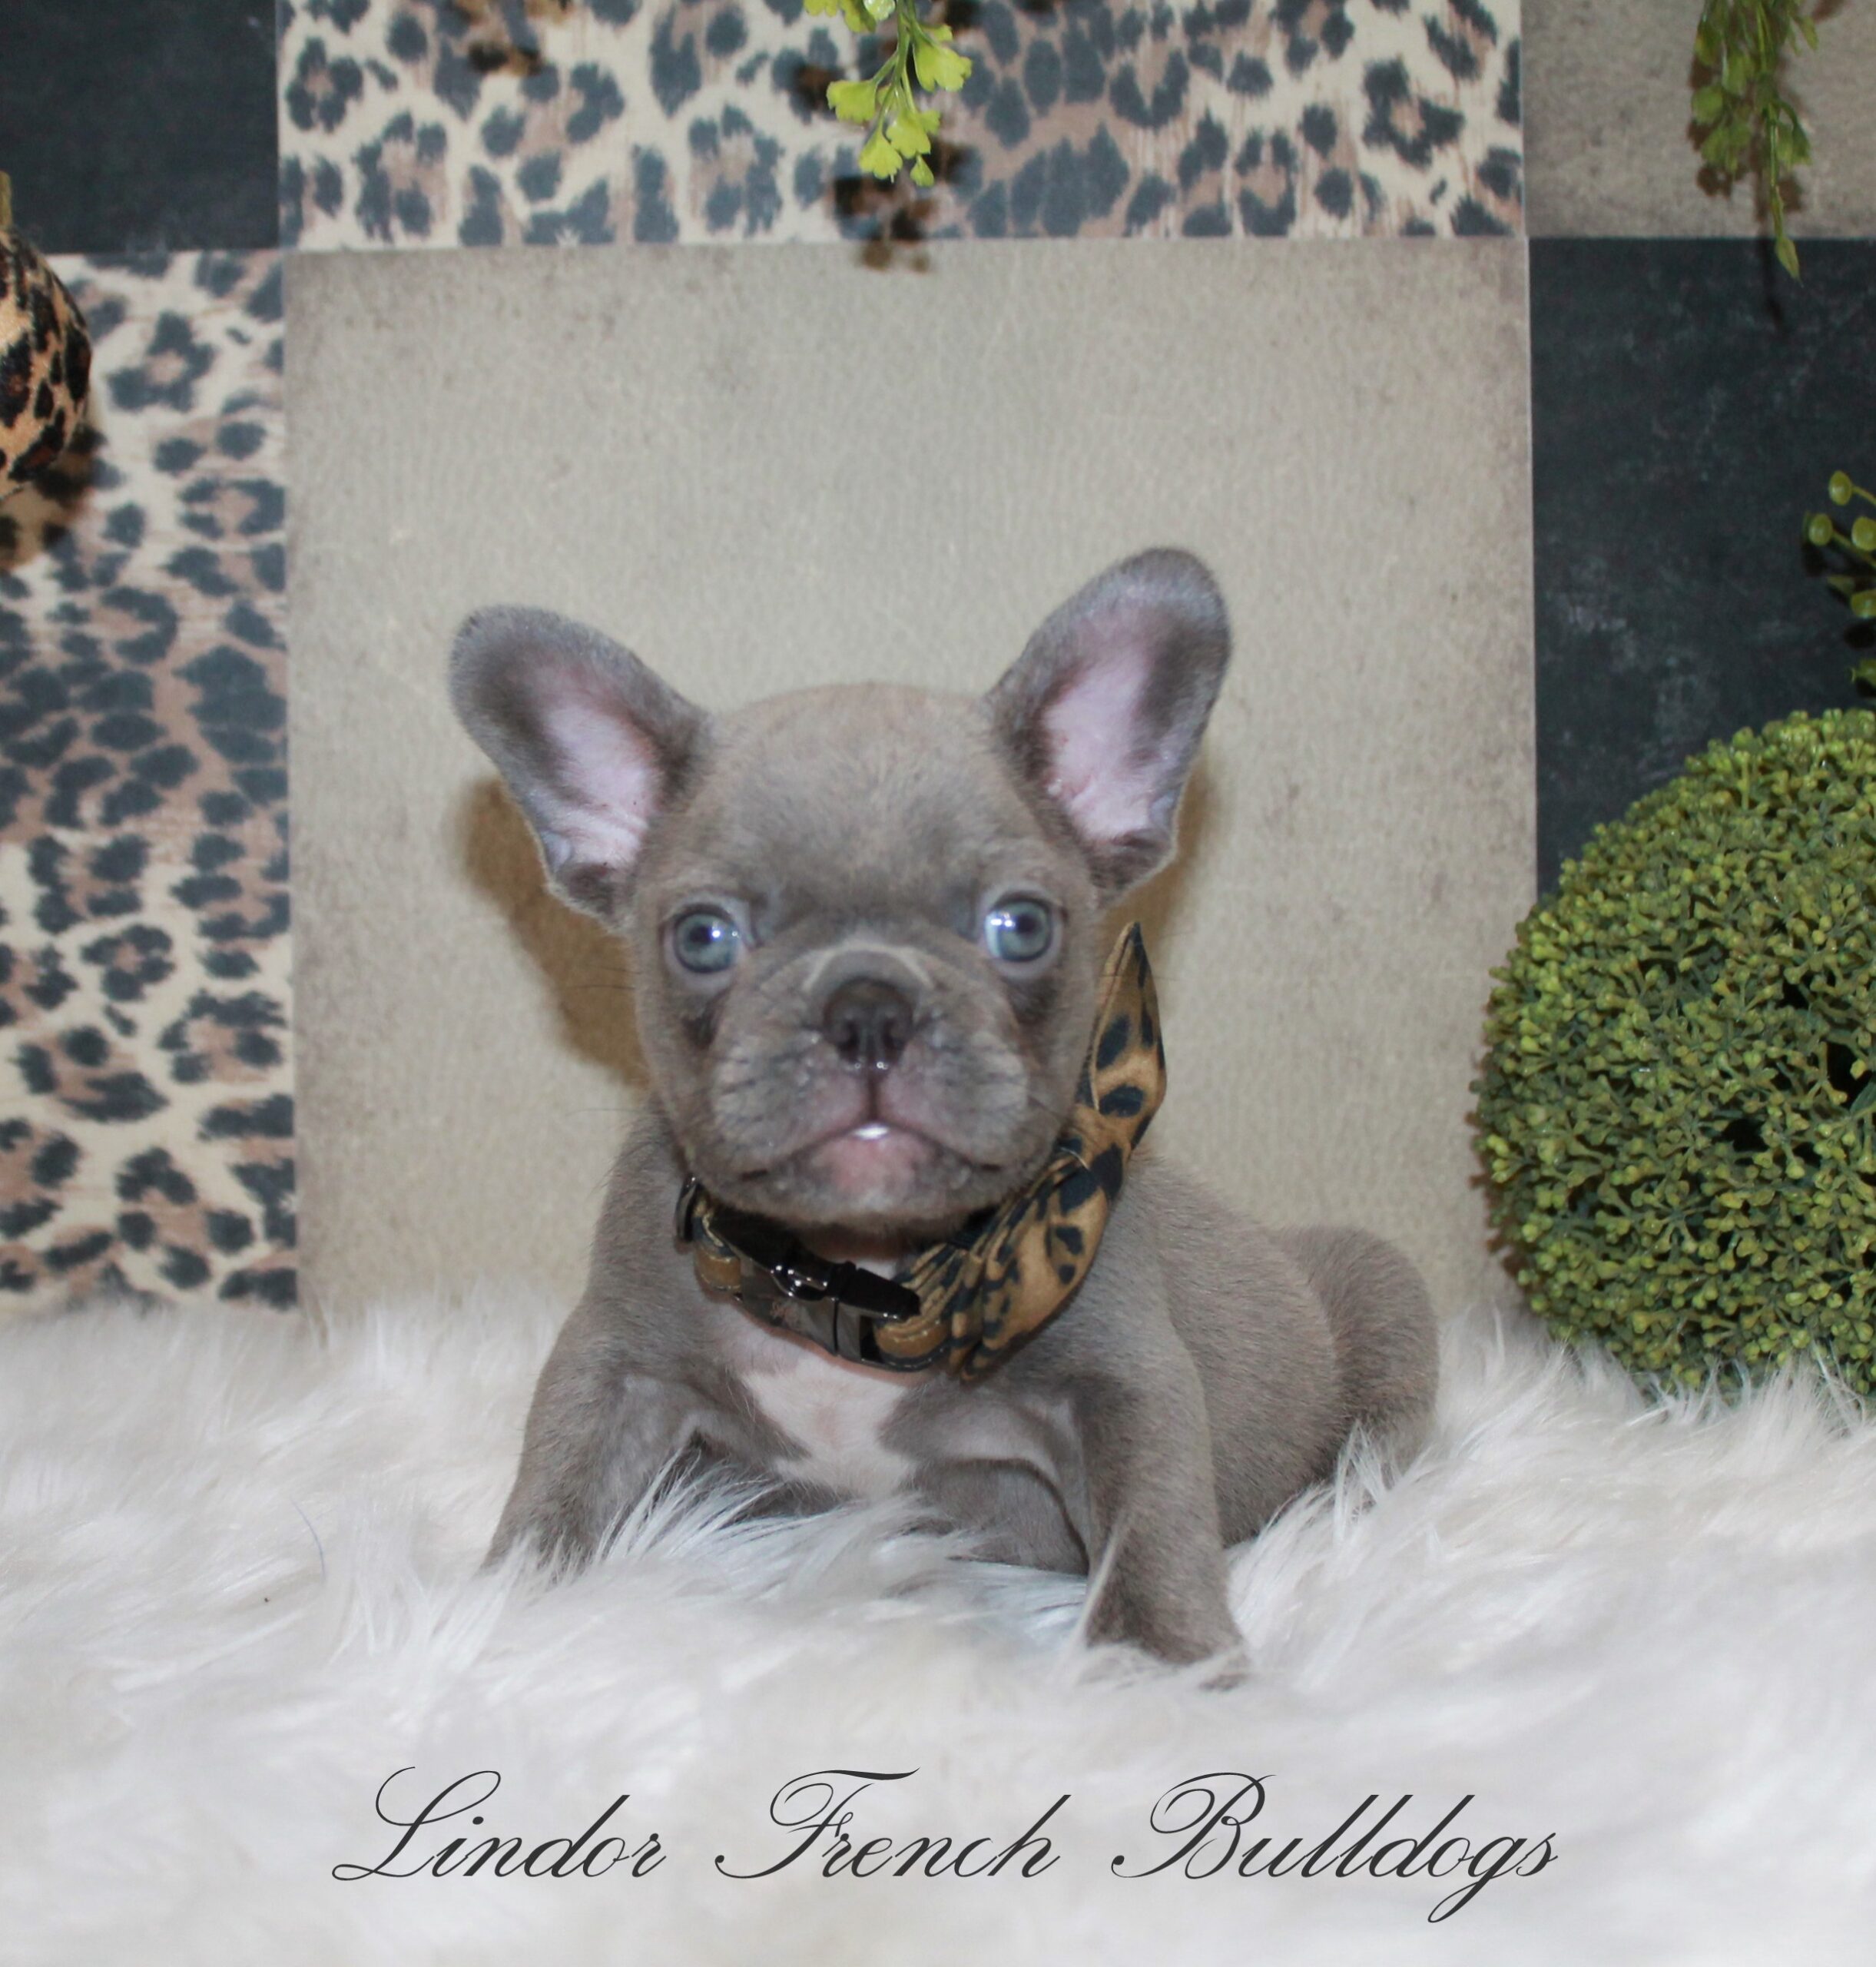 Grey Frenchie on faux fur blanket